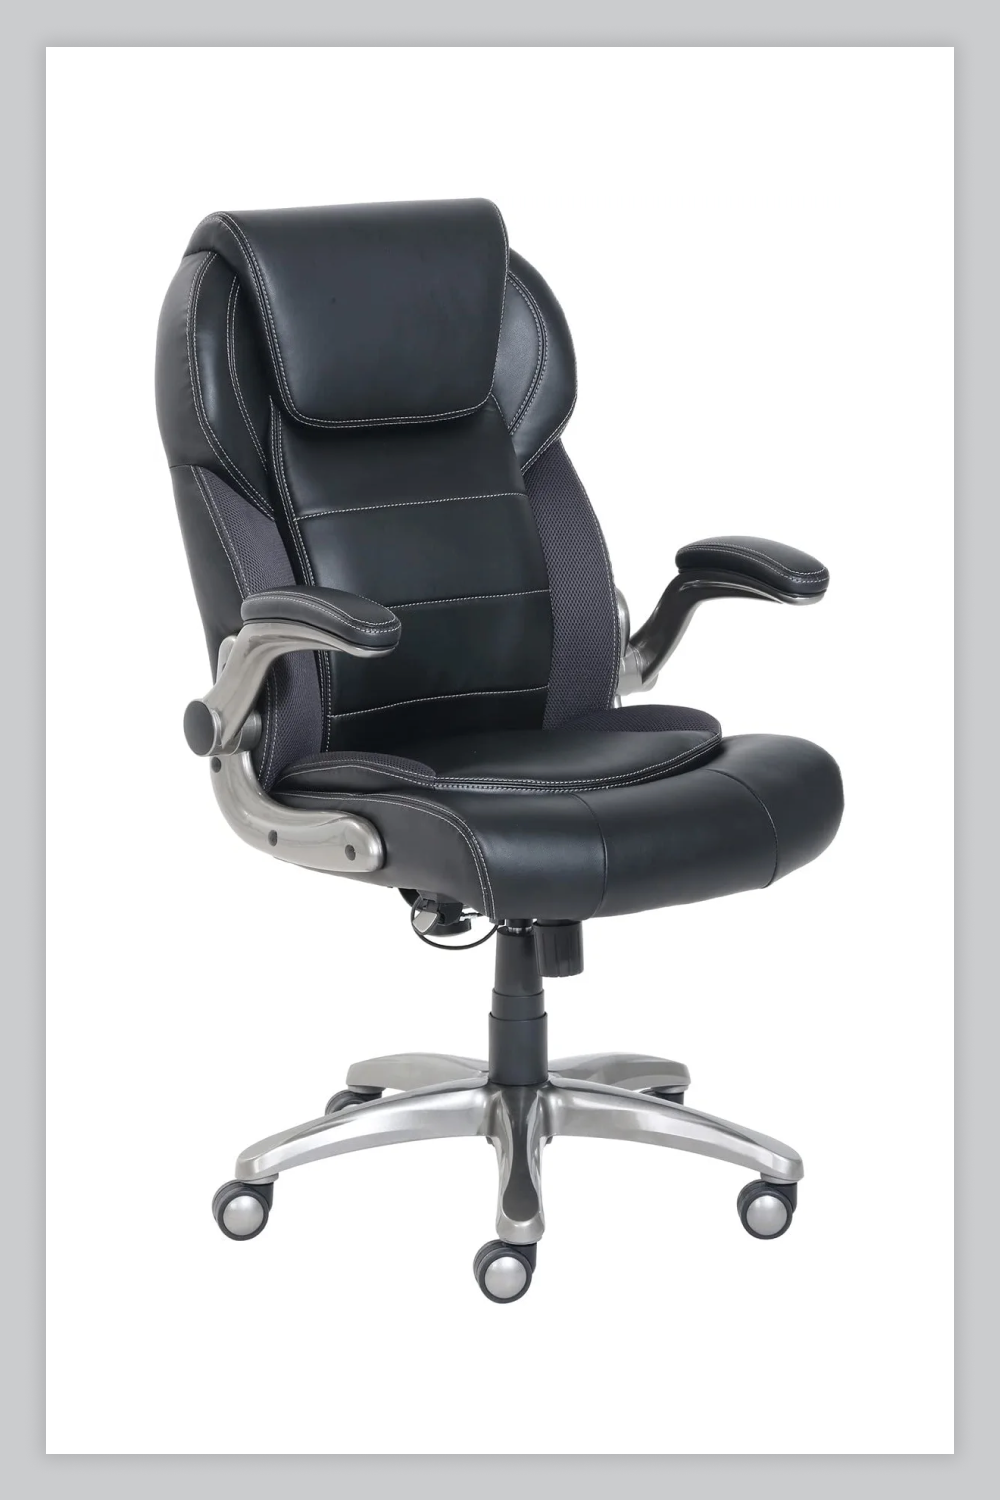 AmazonCommercial Ergonomic High-Back Bonded Leather Executive Chair with Flip-Up Arms.